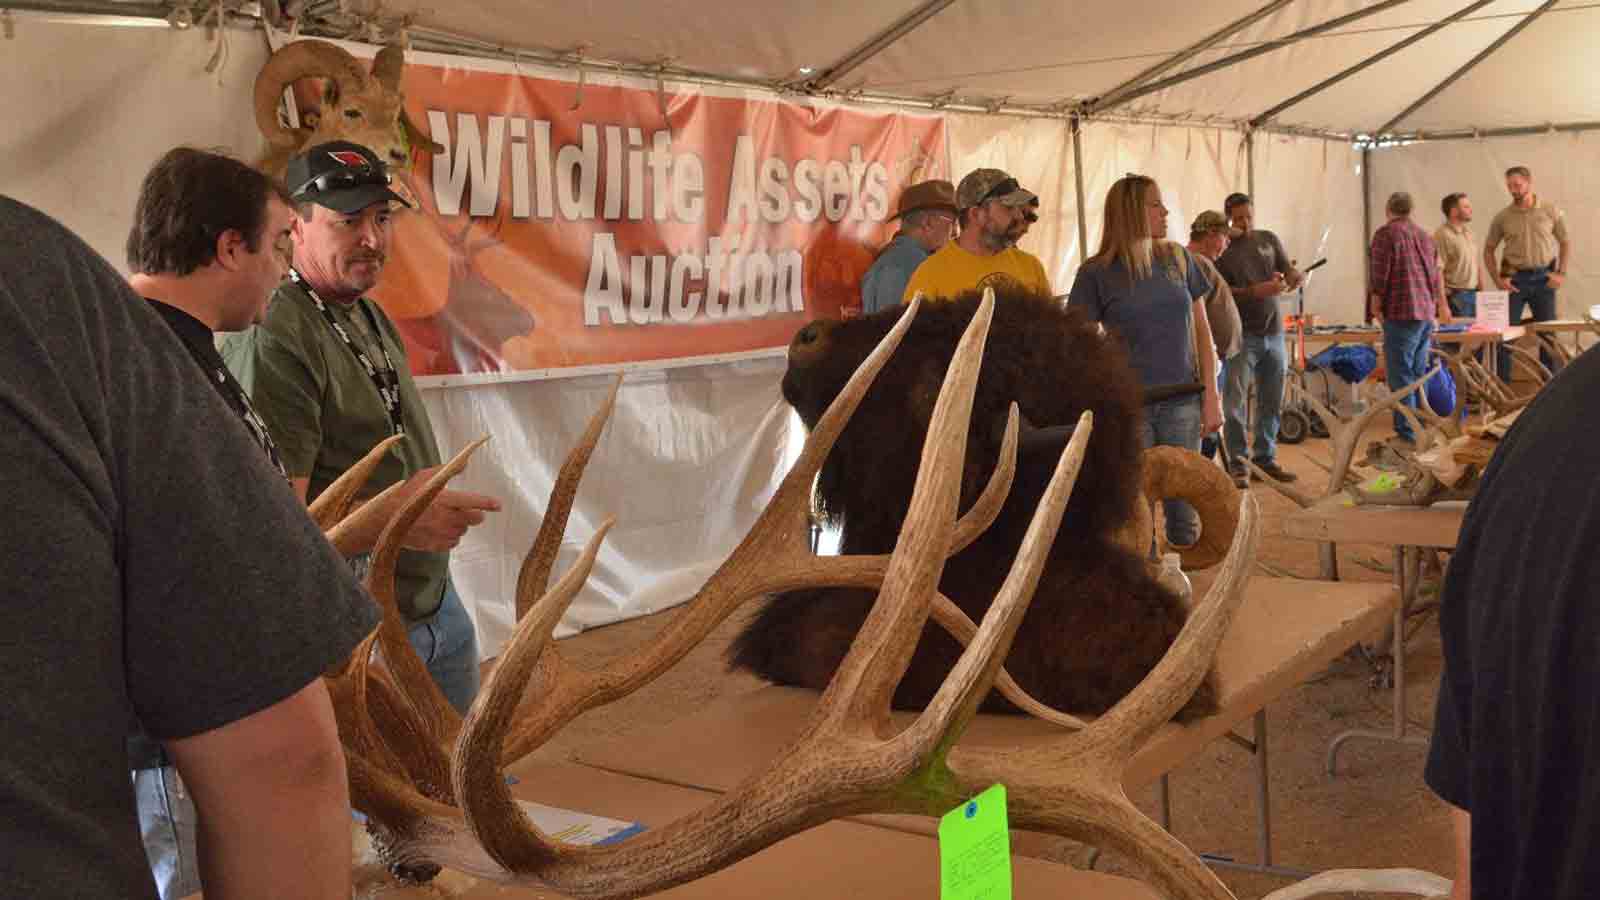 Annual wildlife outdoor expo returns north of Phoenix this weekend